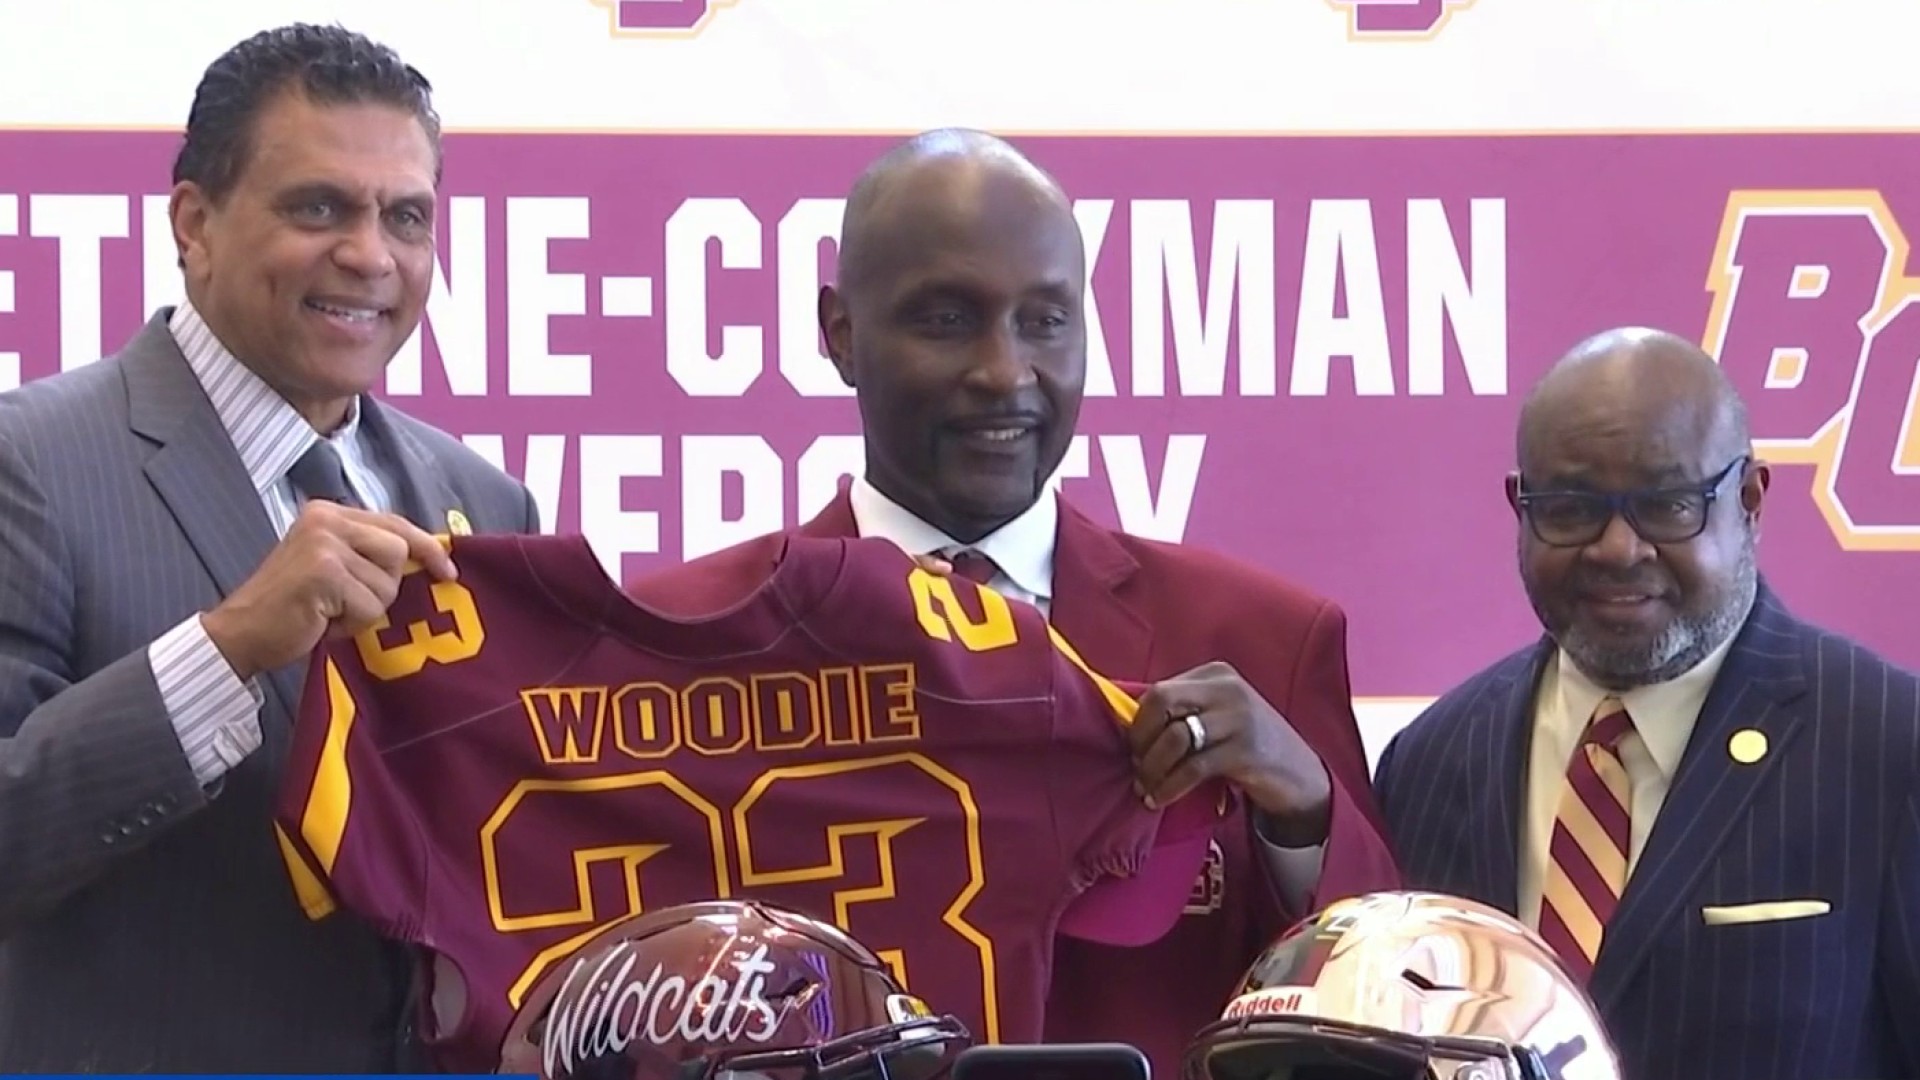 Ed Reed agrees to become Bethune-Cookman's football coach